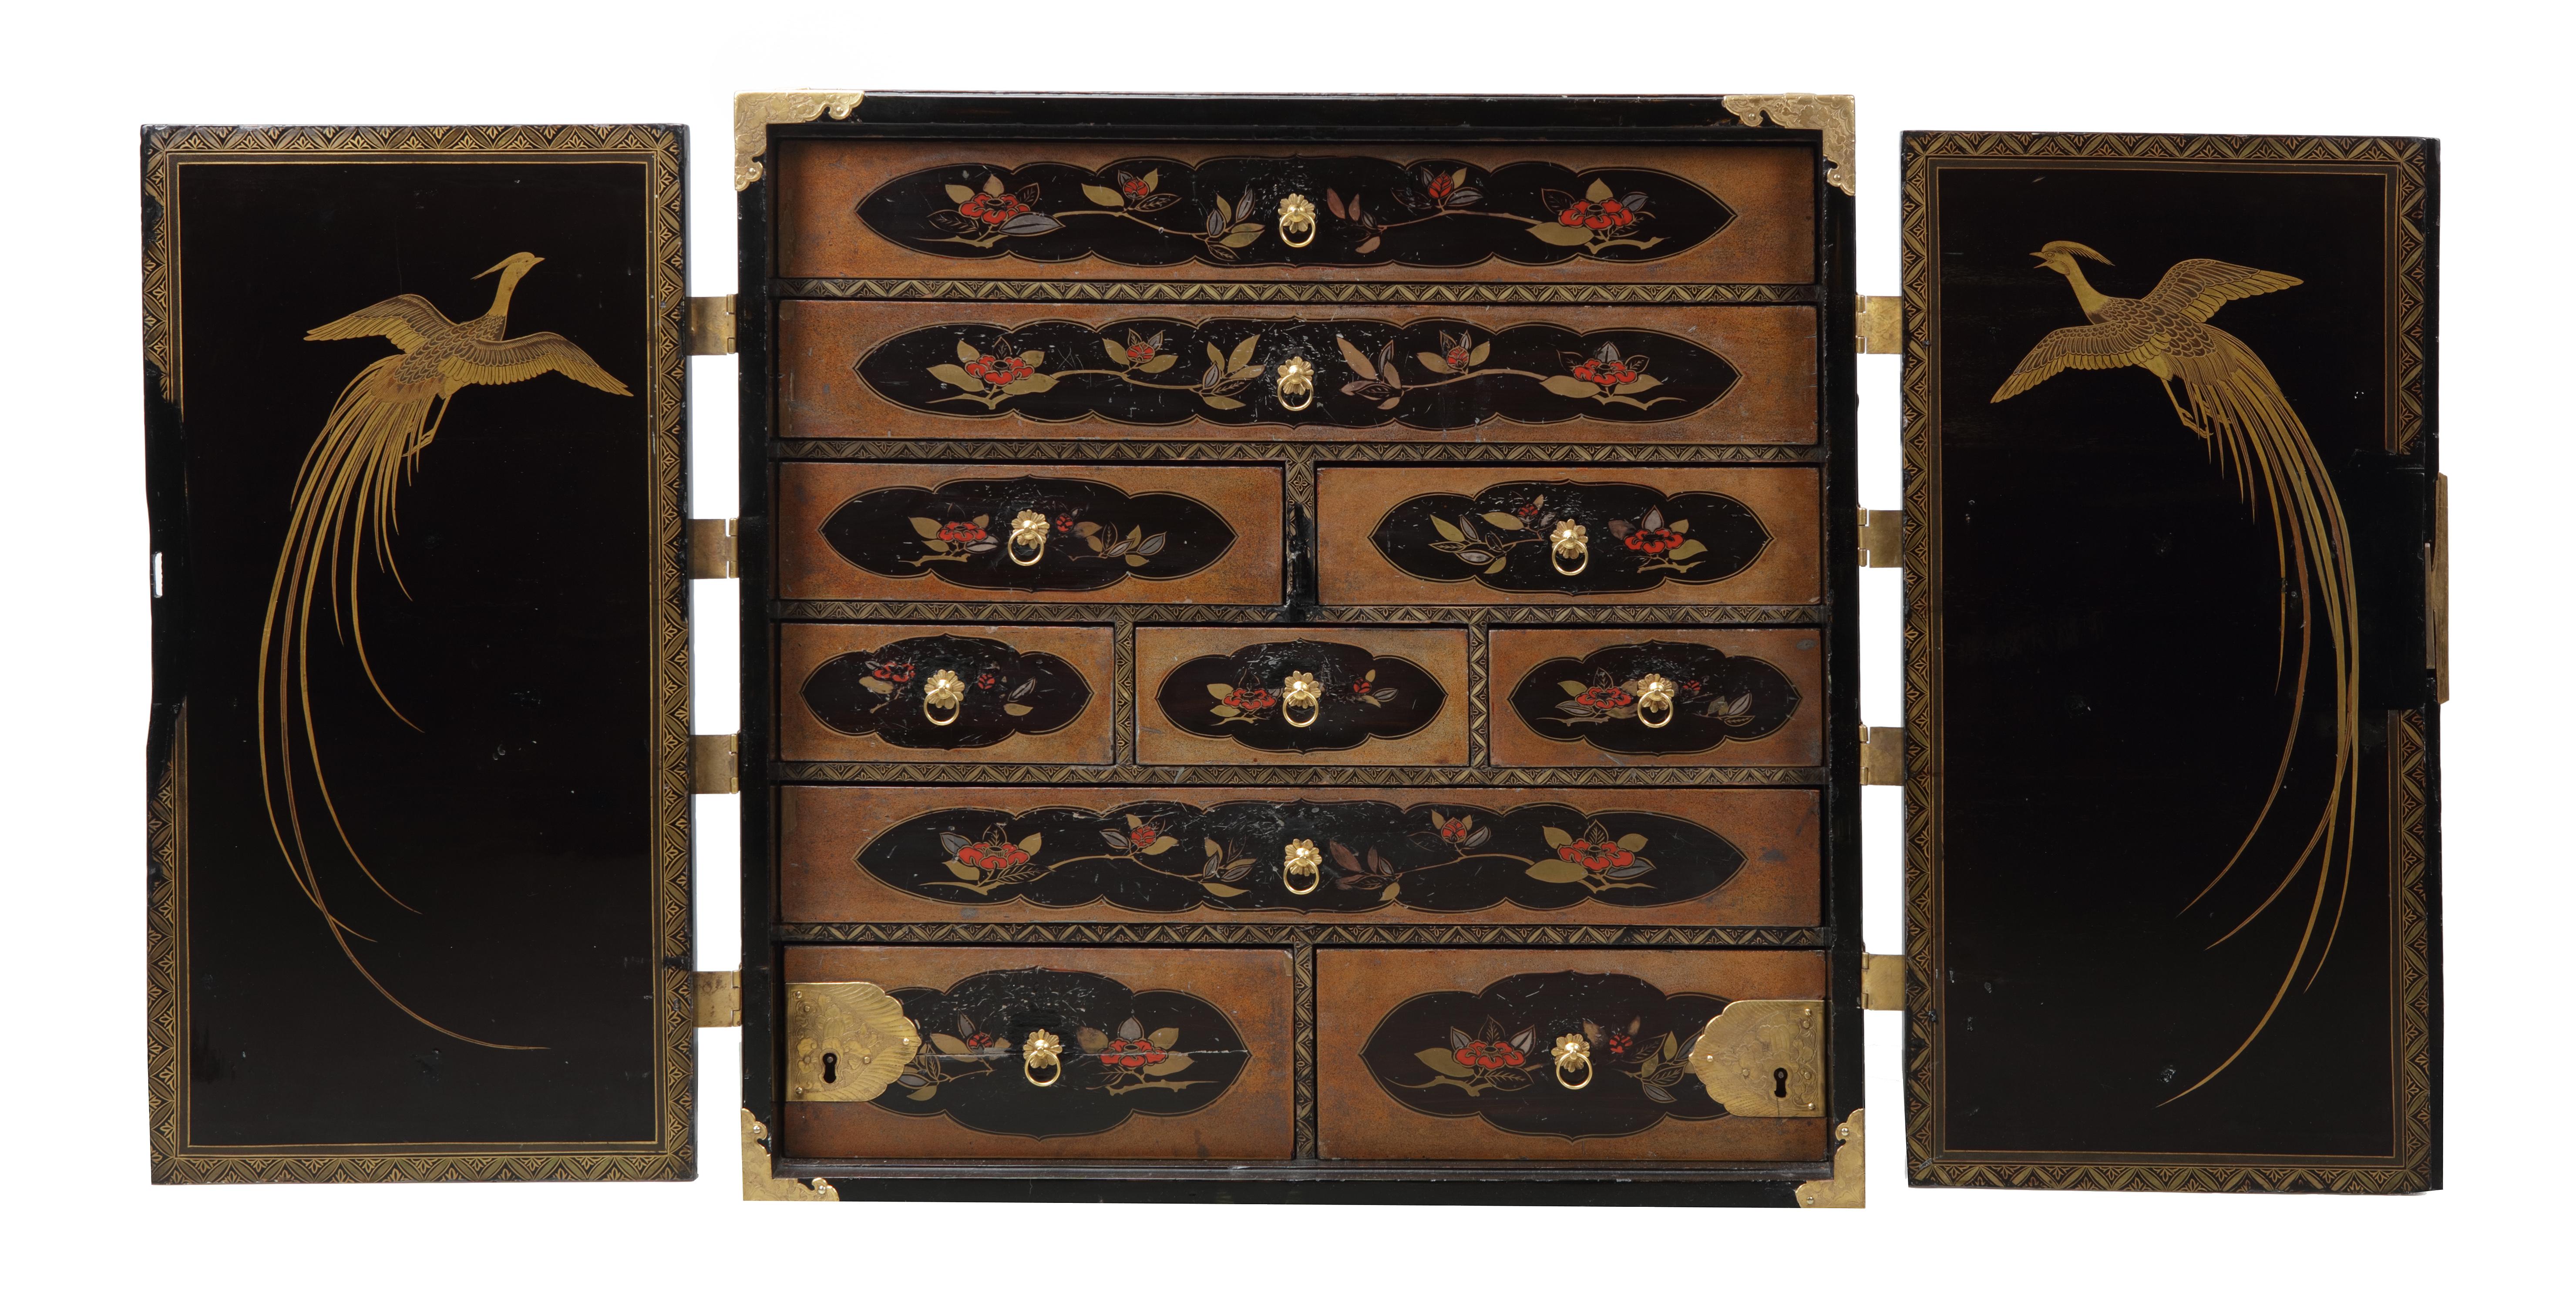 Rare Charming 17th Century Japanese Lacquer Cabinet with Gilt-Bronze Mounts In Good Condition For Sale In Amsterdam, NL